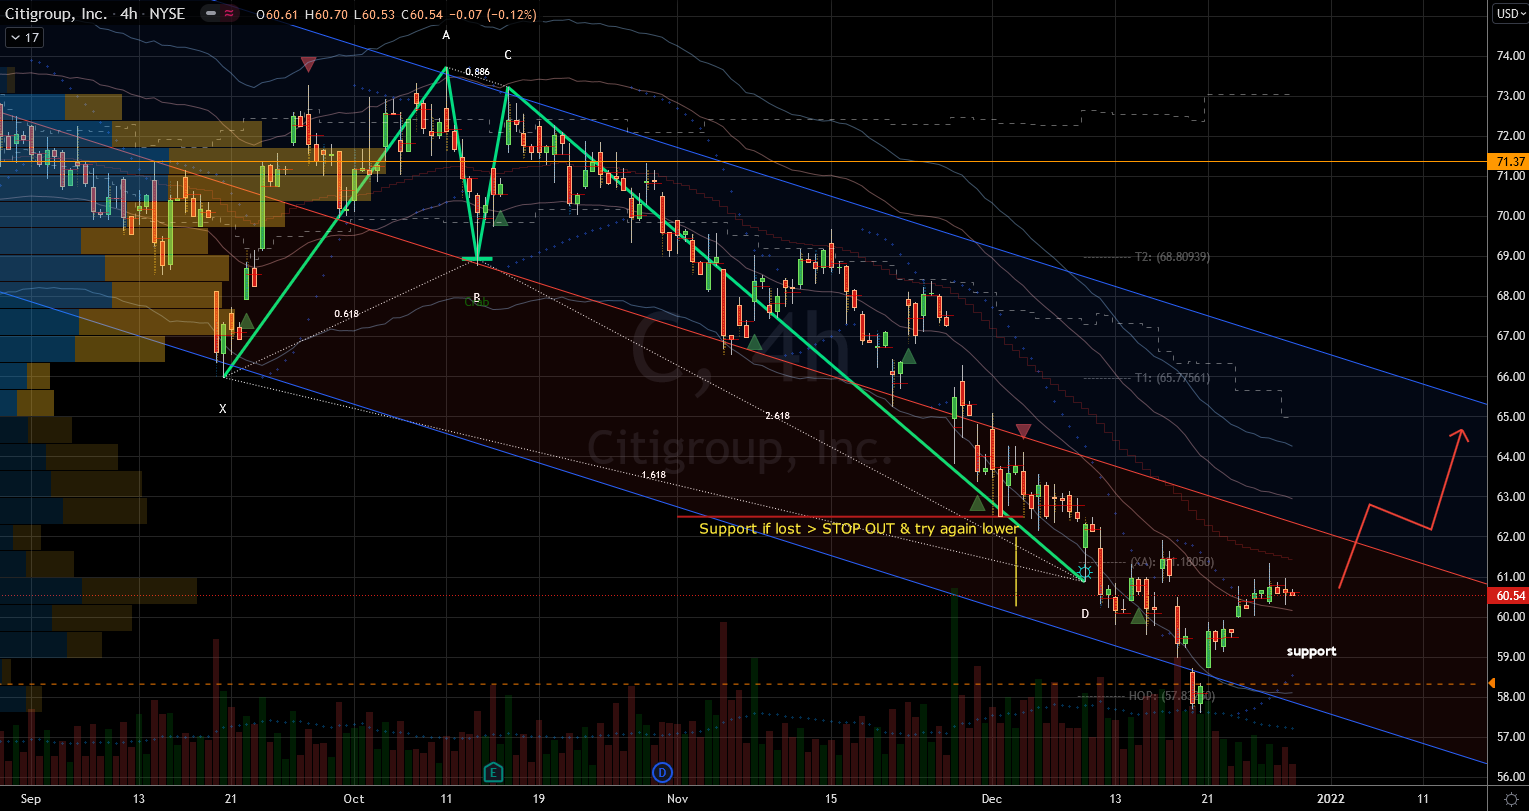 Stocks to Buy: Citigroup (C) Stock Chart Showing Potential Base